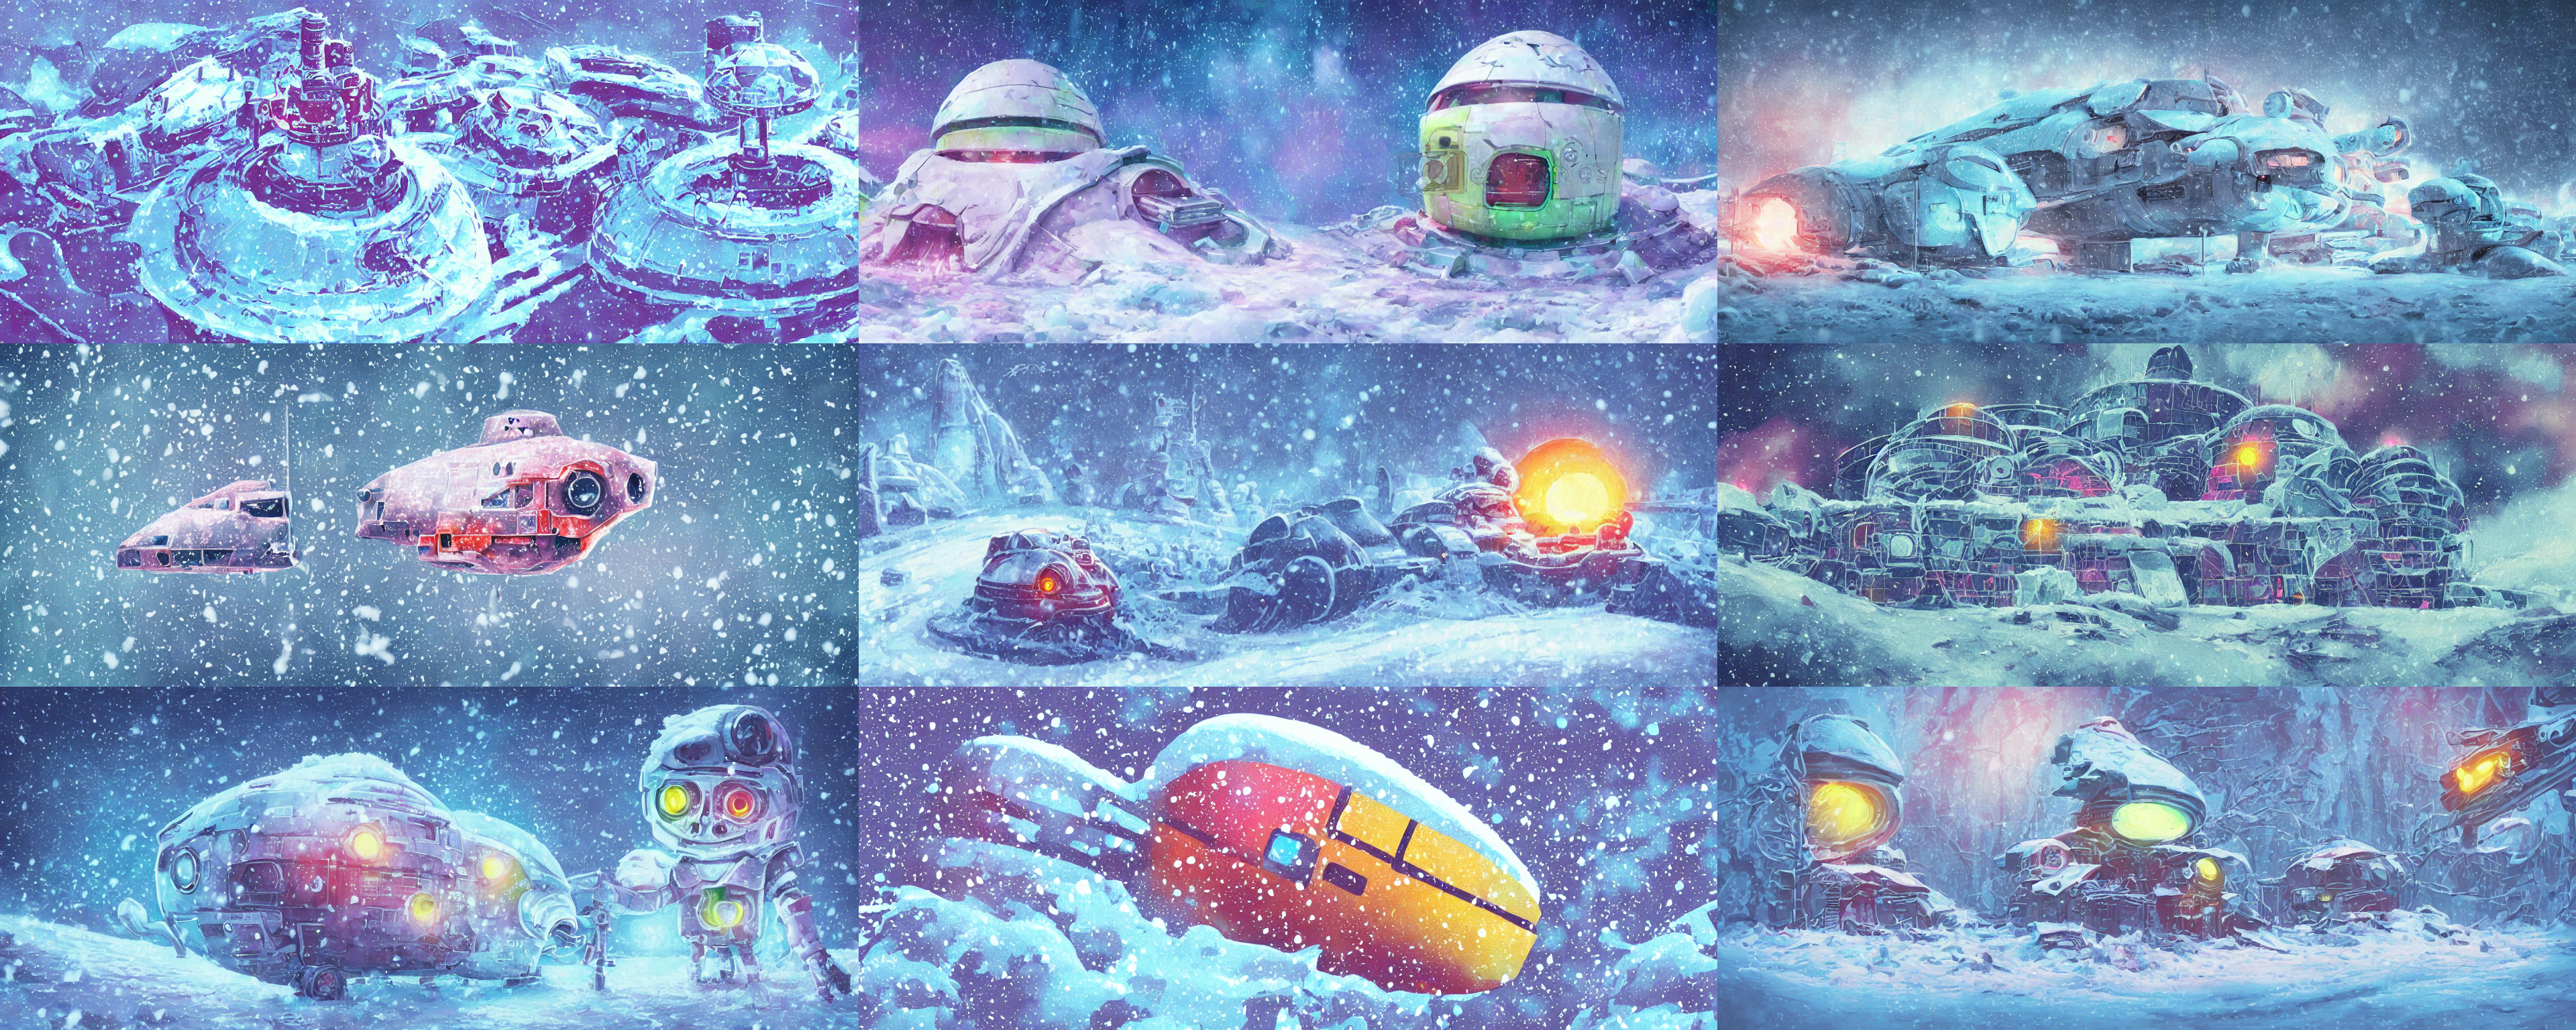 soft focus detailed colorful illustration of a cute damaged alien scout spaceship covered in snow, dystopian world